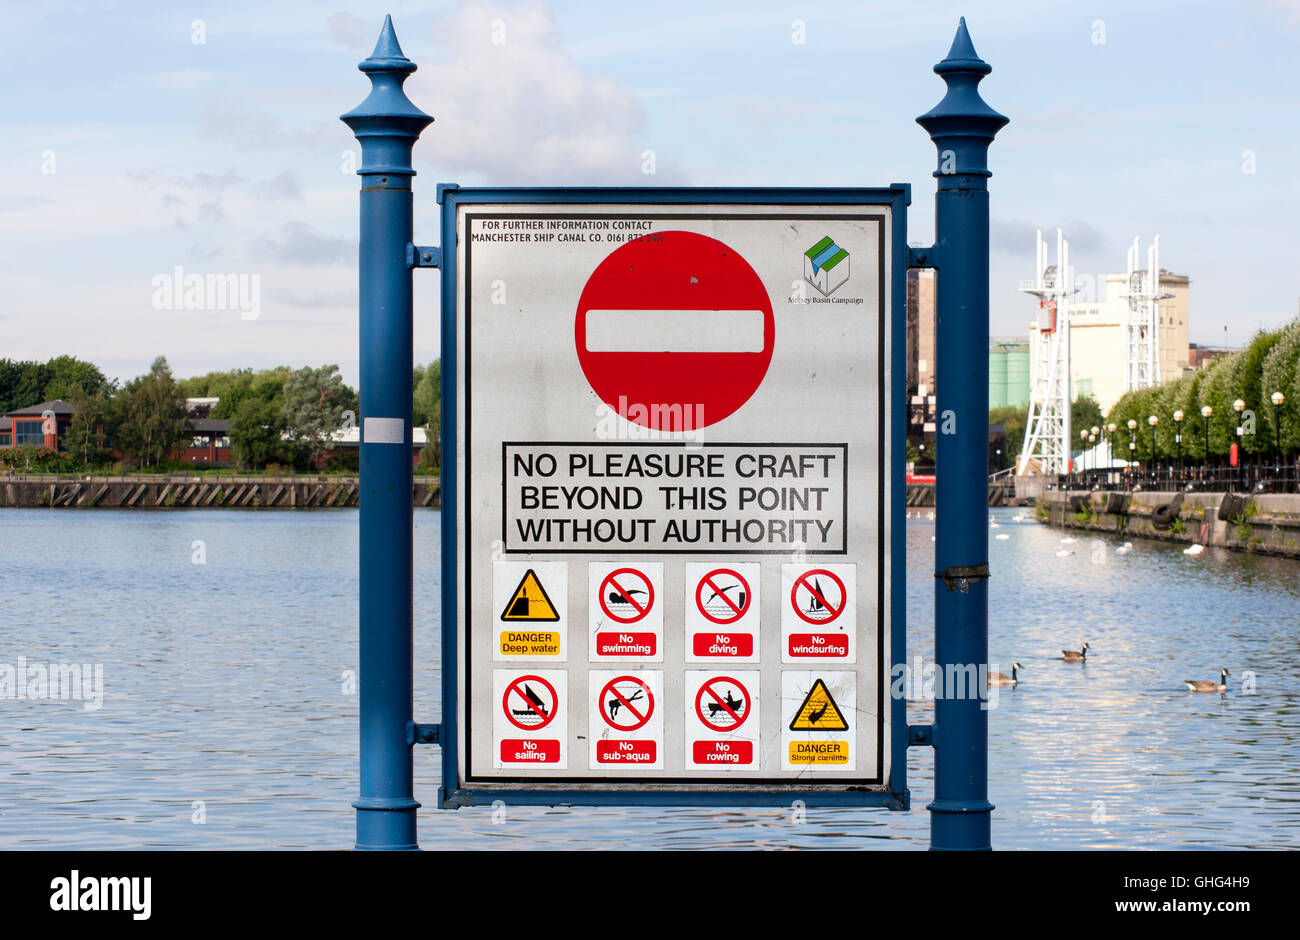 No Pleasure Craft Beyond this Point Sign. Manchester Ship Canal. Salford Quays. Stock Photo